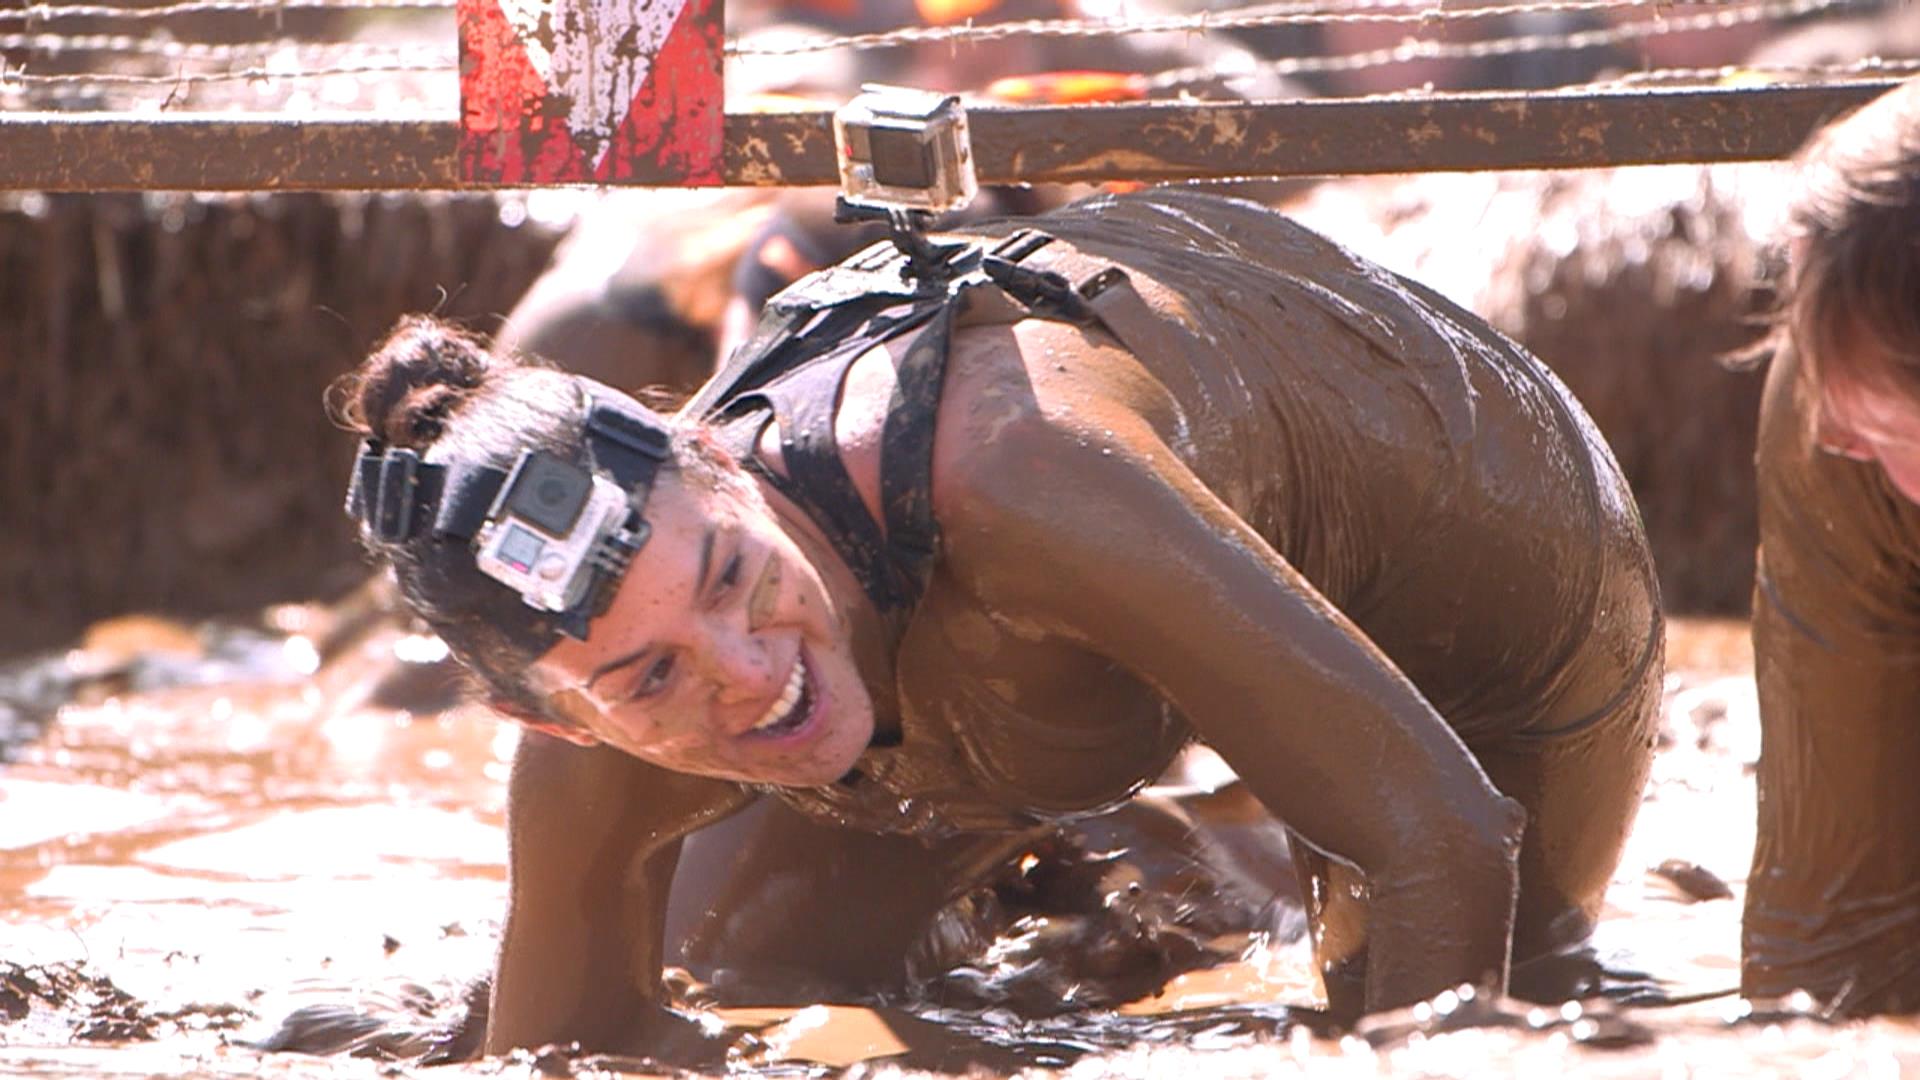 Watch TODAY’s Donnadorable tackle the Tough Mudder obstacle course - TODAY.com1920 x 1080